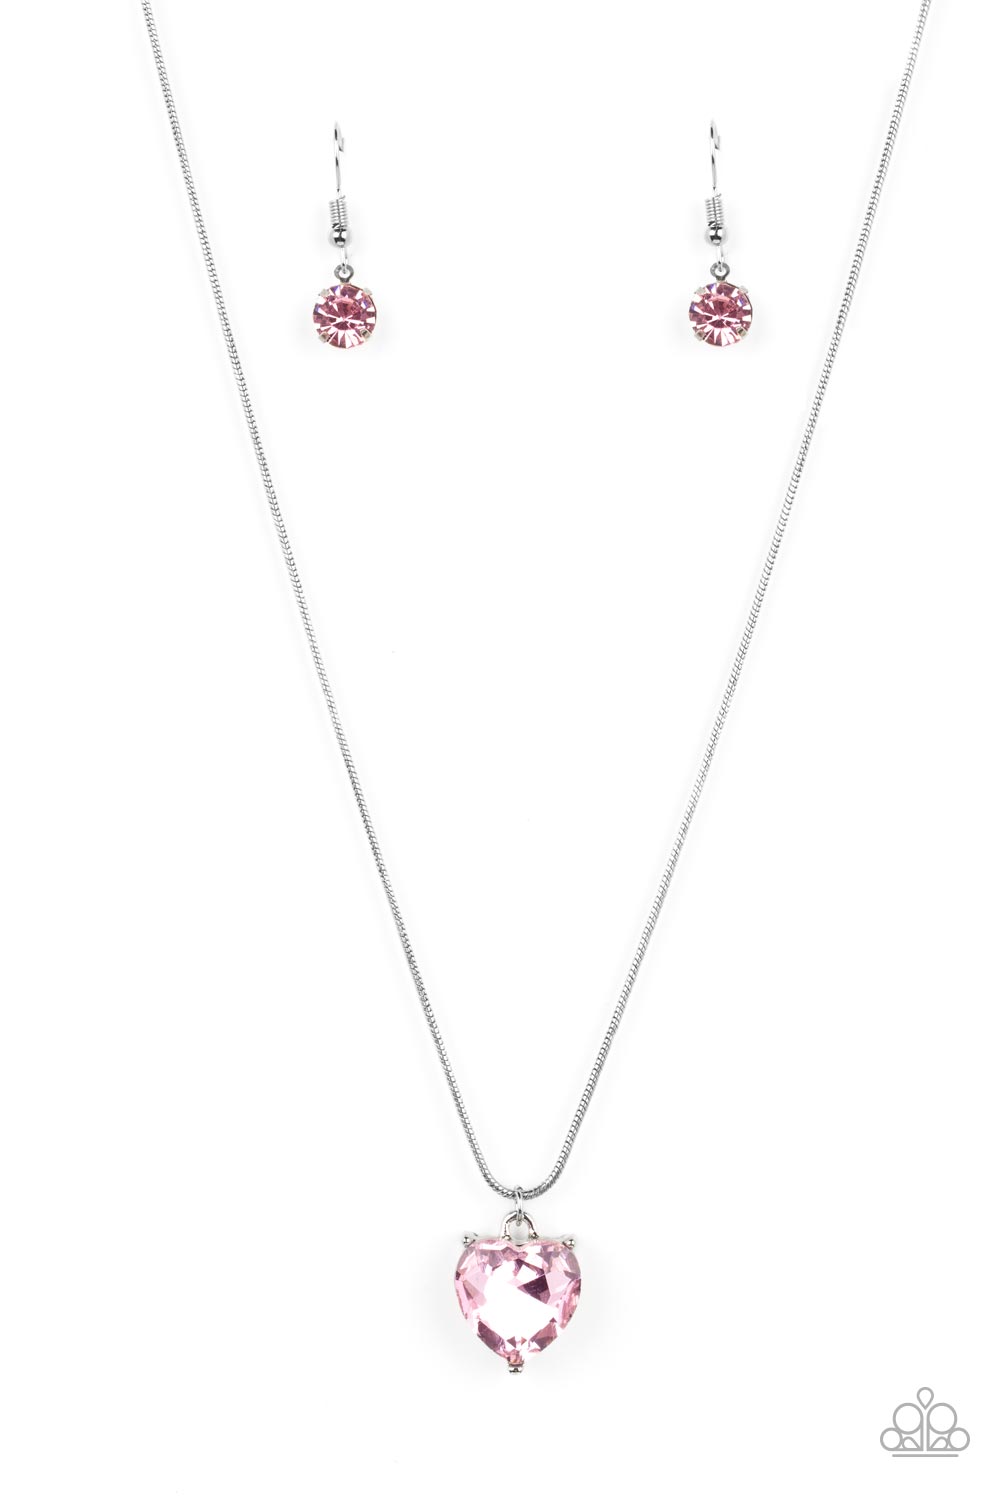 Smitten with Style - Pink Heart-Shaped Rhinestone Pendant Paparazzi Necklace & matching earrings